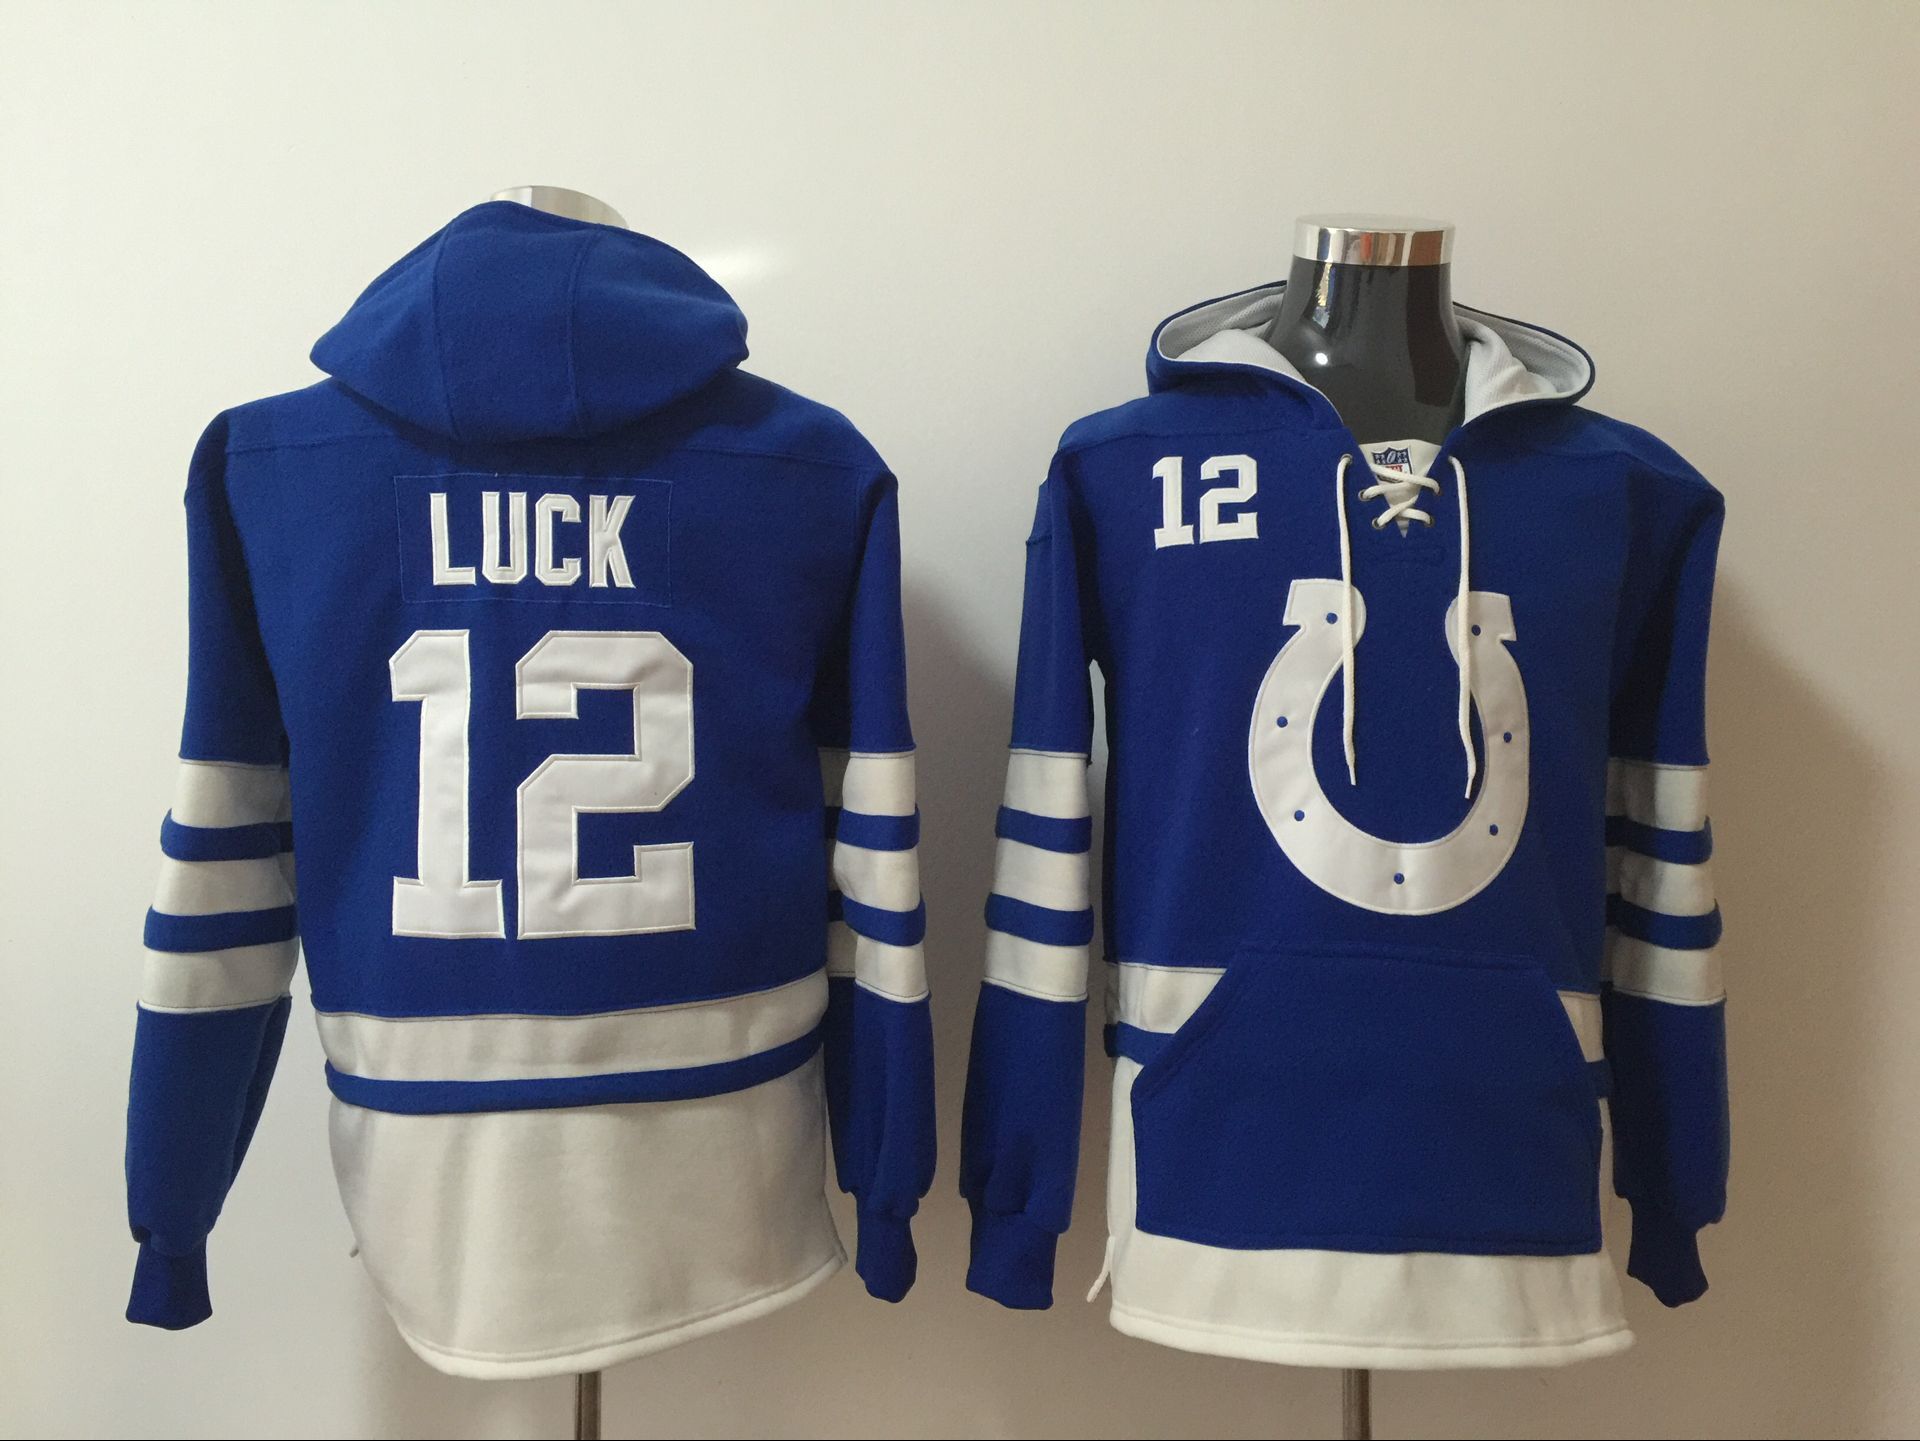 Men's Indianapolis Colts #12 Andrew Luck NEW Royal Blue Pocket Stitched NFL Pullover Hoodie